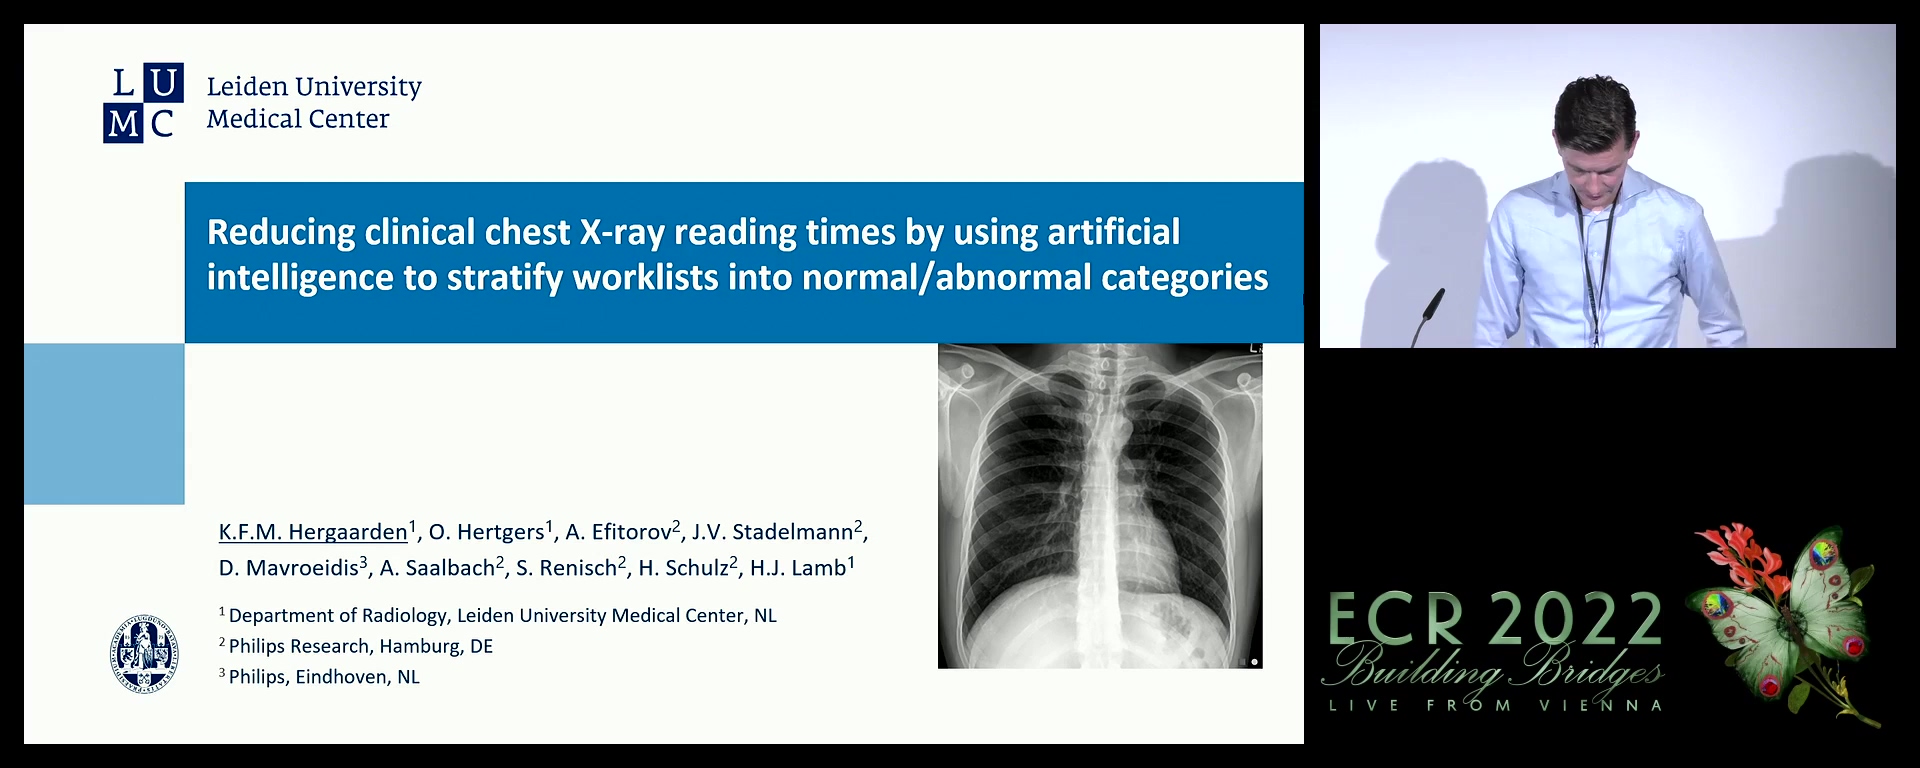 Reducing clinical chest X-ray reading times by using artificial intelligence to stratify worklists into normal/abnormal categories